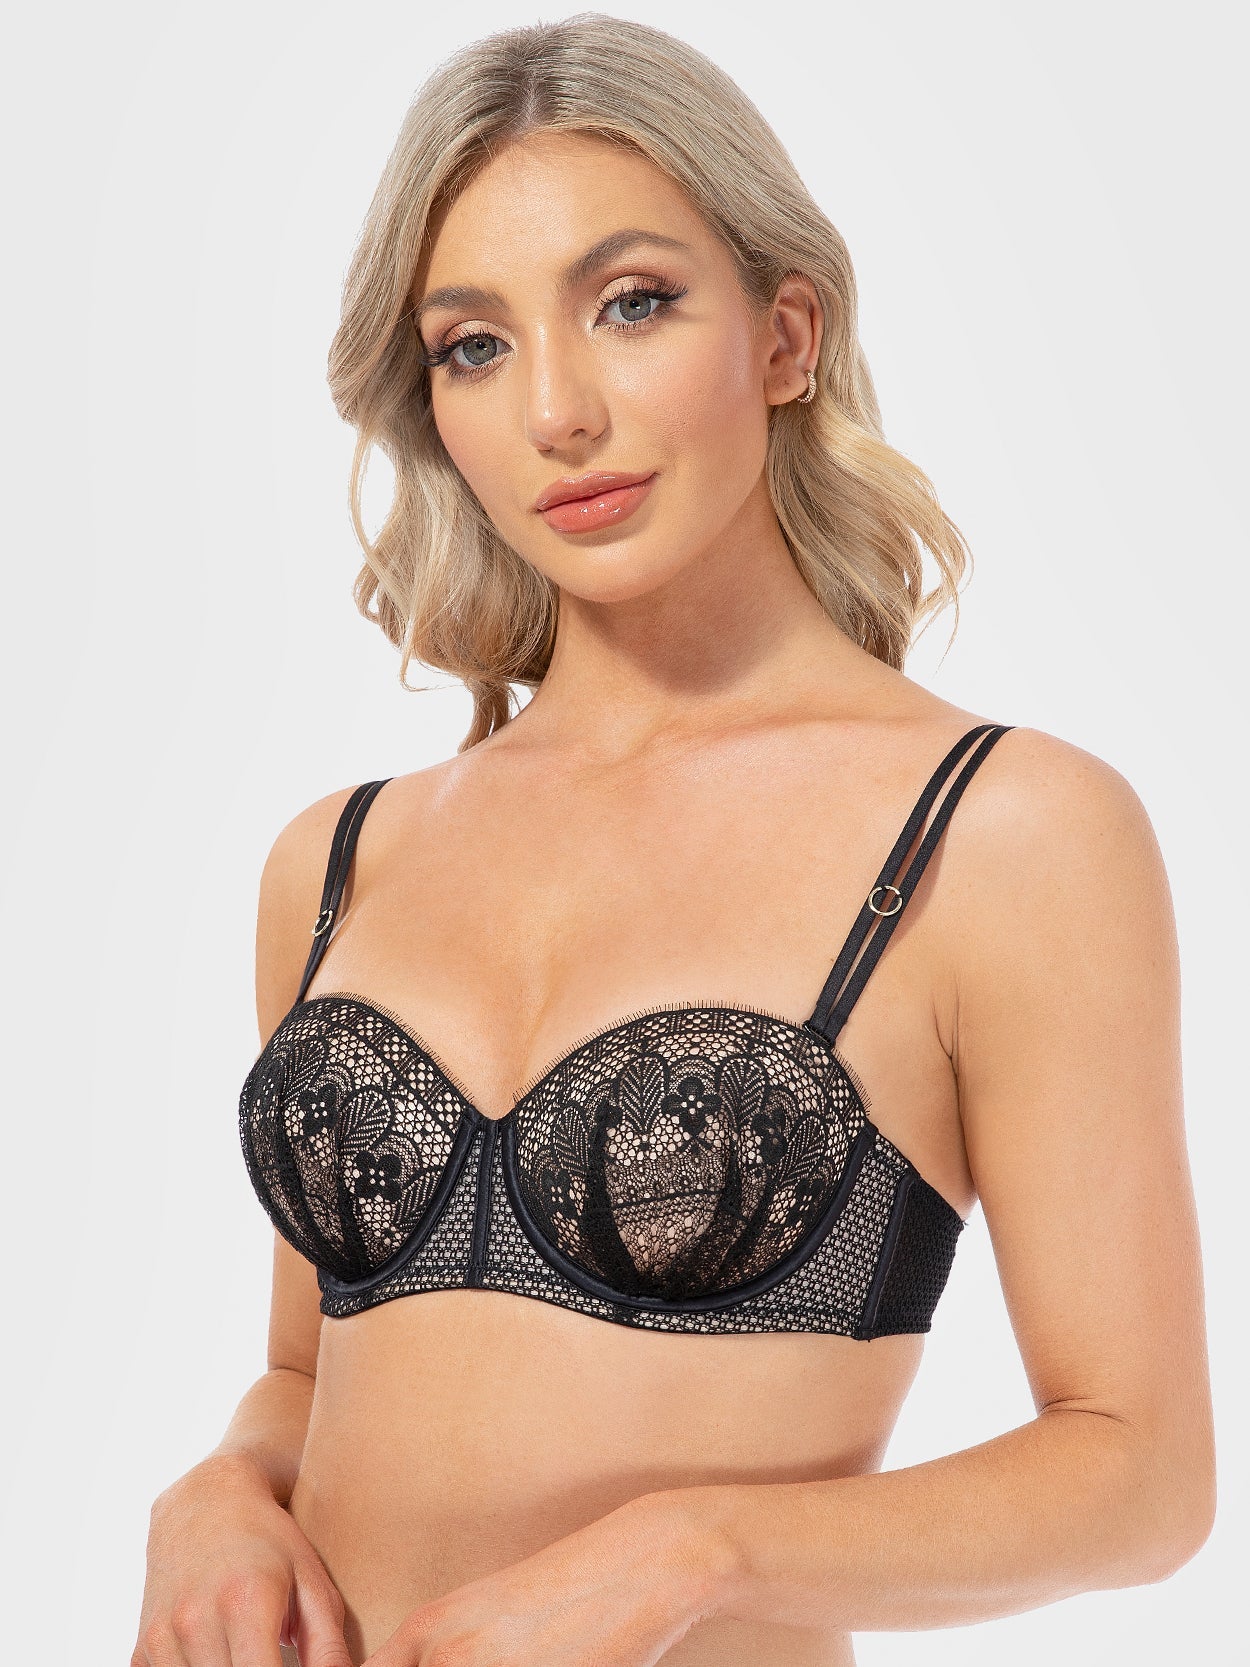 Deyllo Women's Strapless Push Up Full Cup Plus Size Underwire Padded Bra,  Black 34A